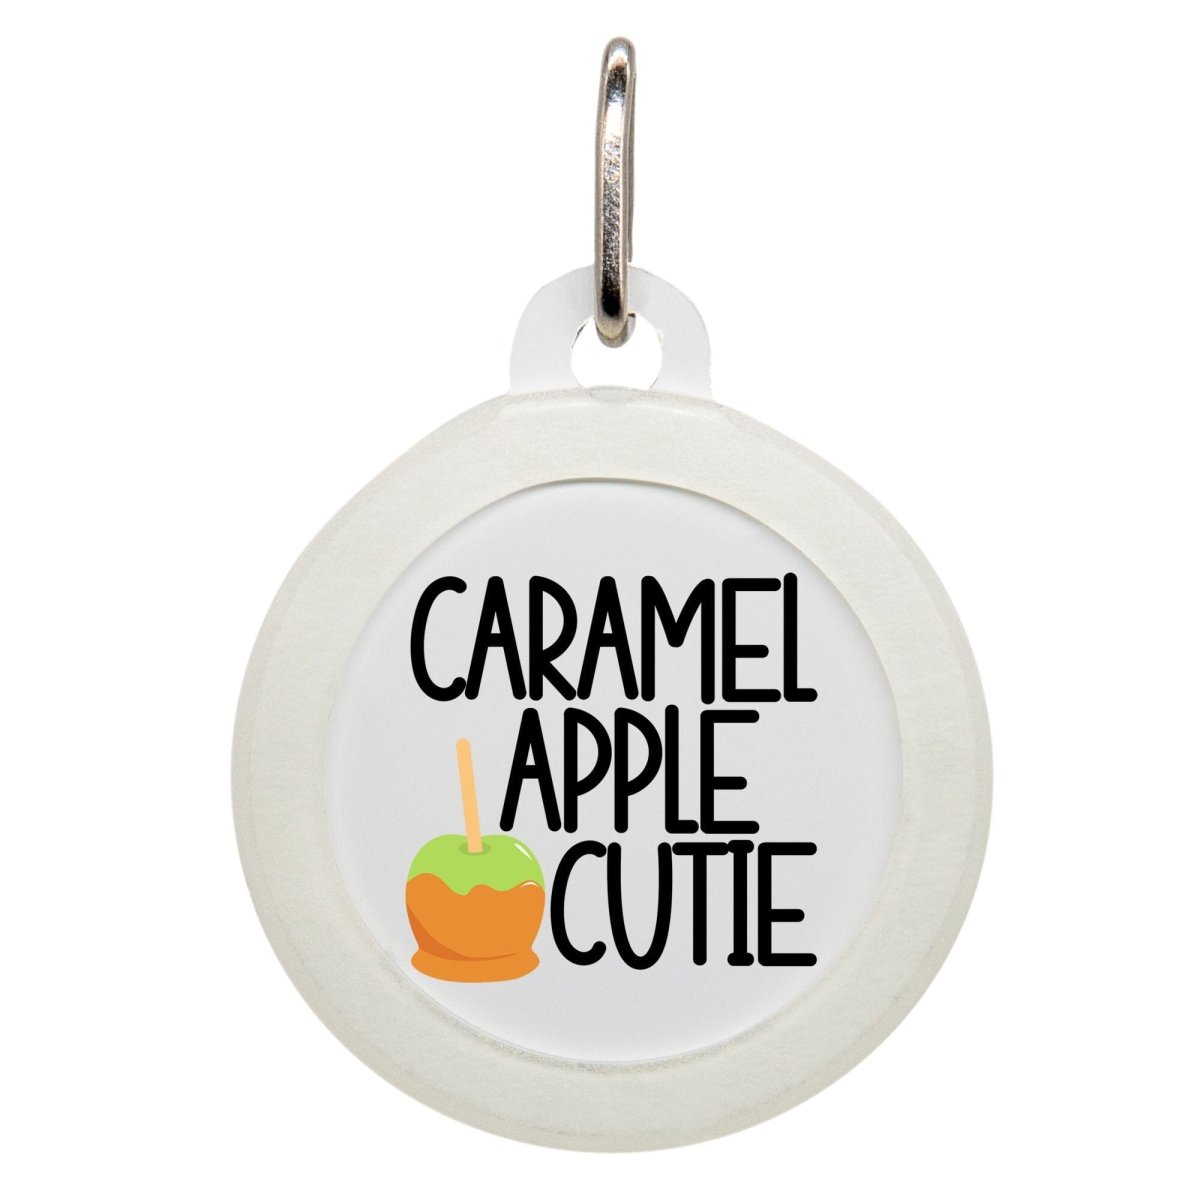 Caramel Apple Cutie Name Tag - Oh My Paw'd